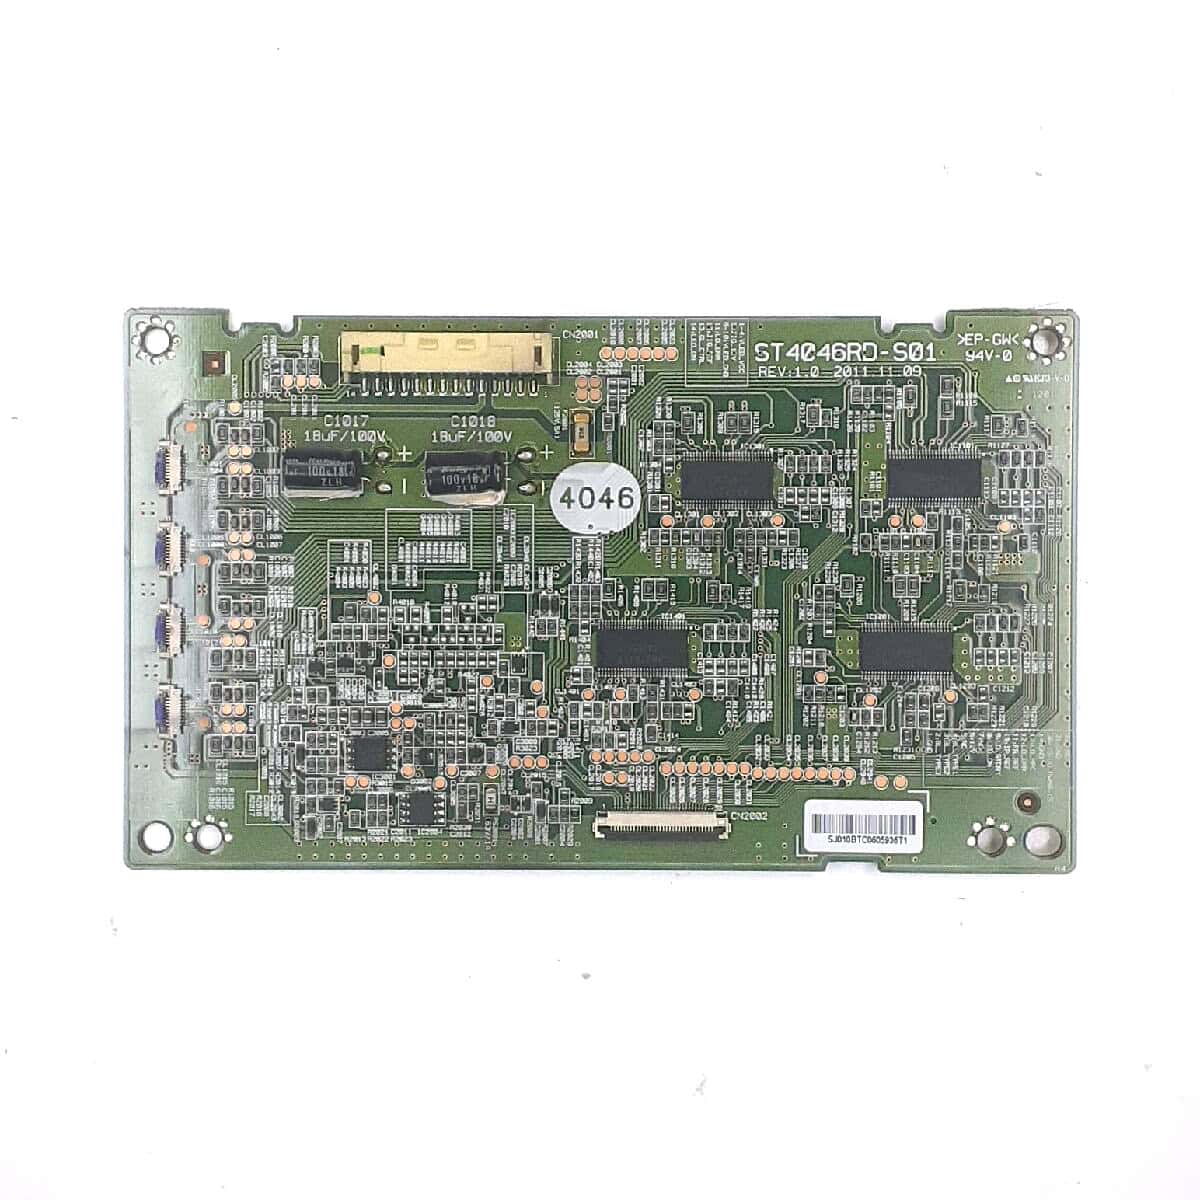 46HX850-SONY-INVERTAR-BOARD-FOR-ST4046RD-S01